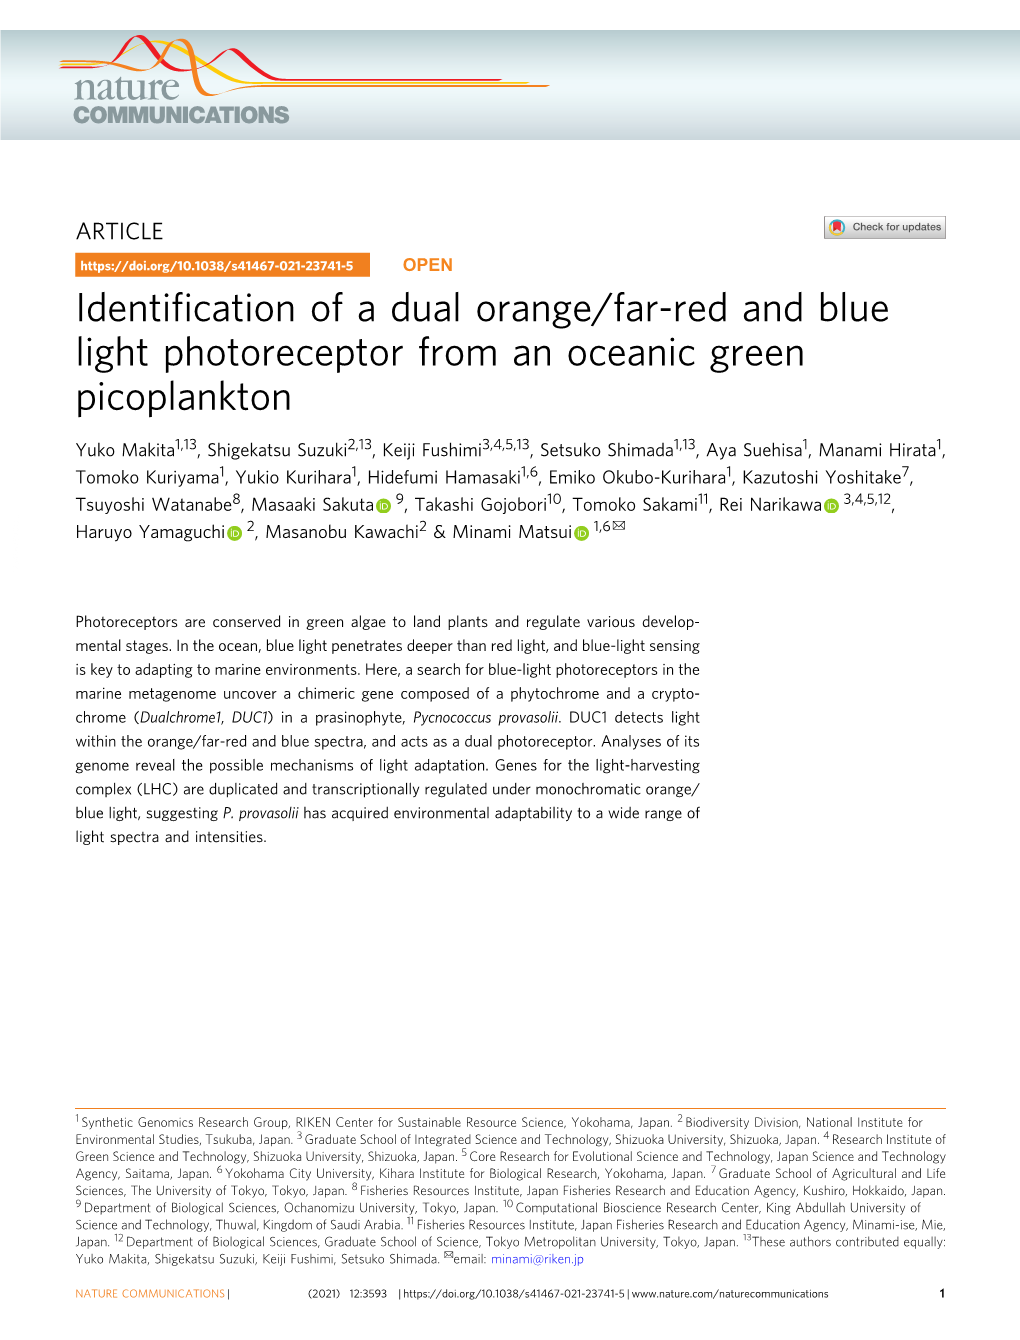 Identification of a Dual Orange/Far-Red and Blue Light Photoreceptor From